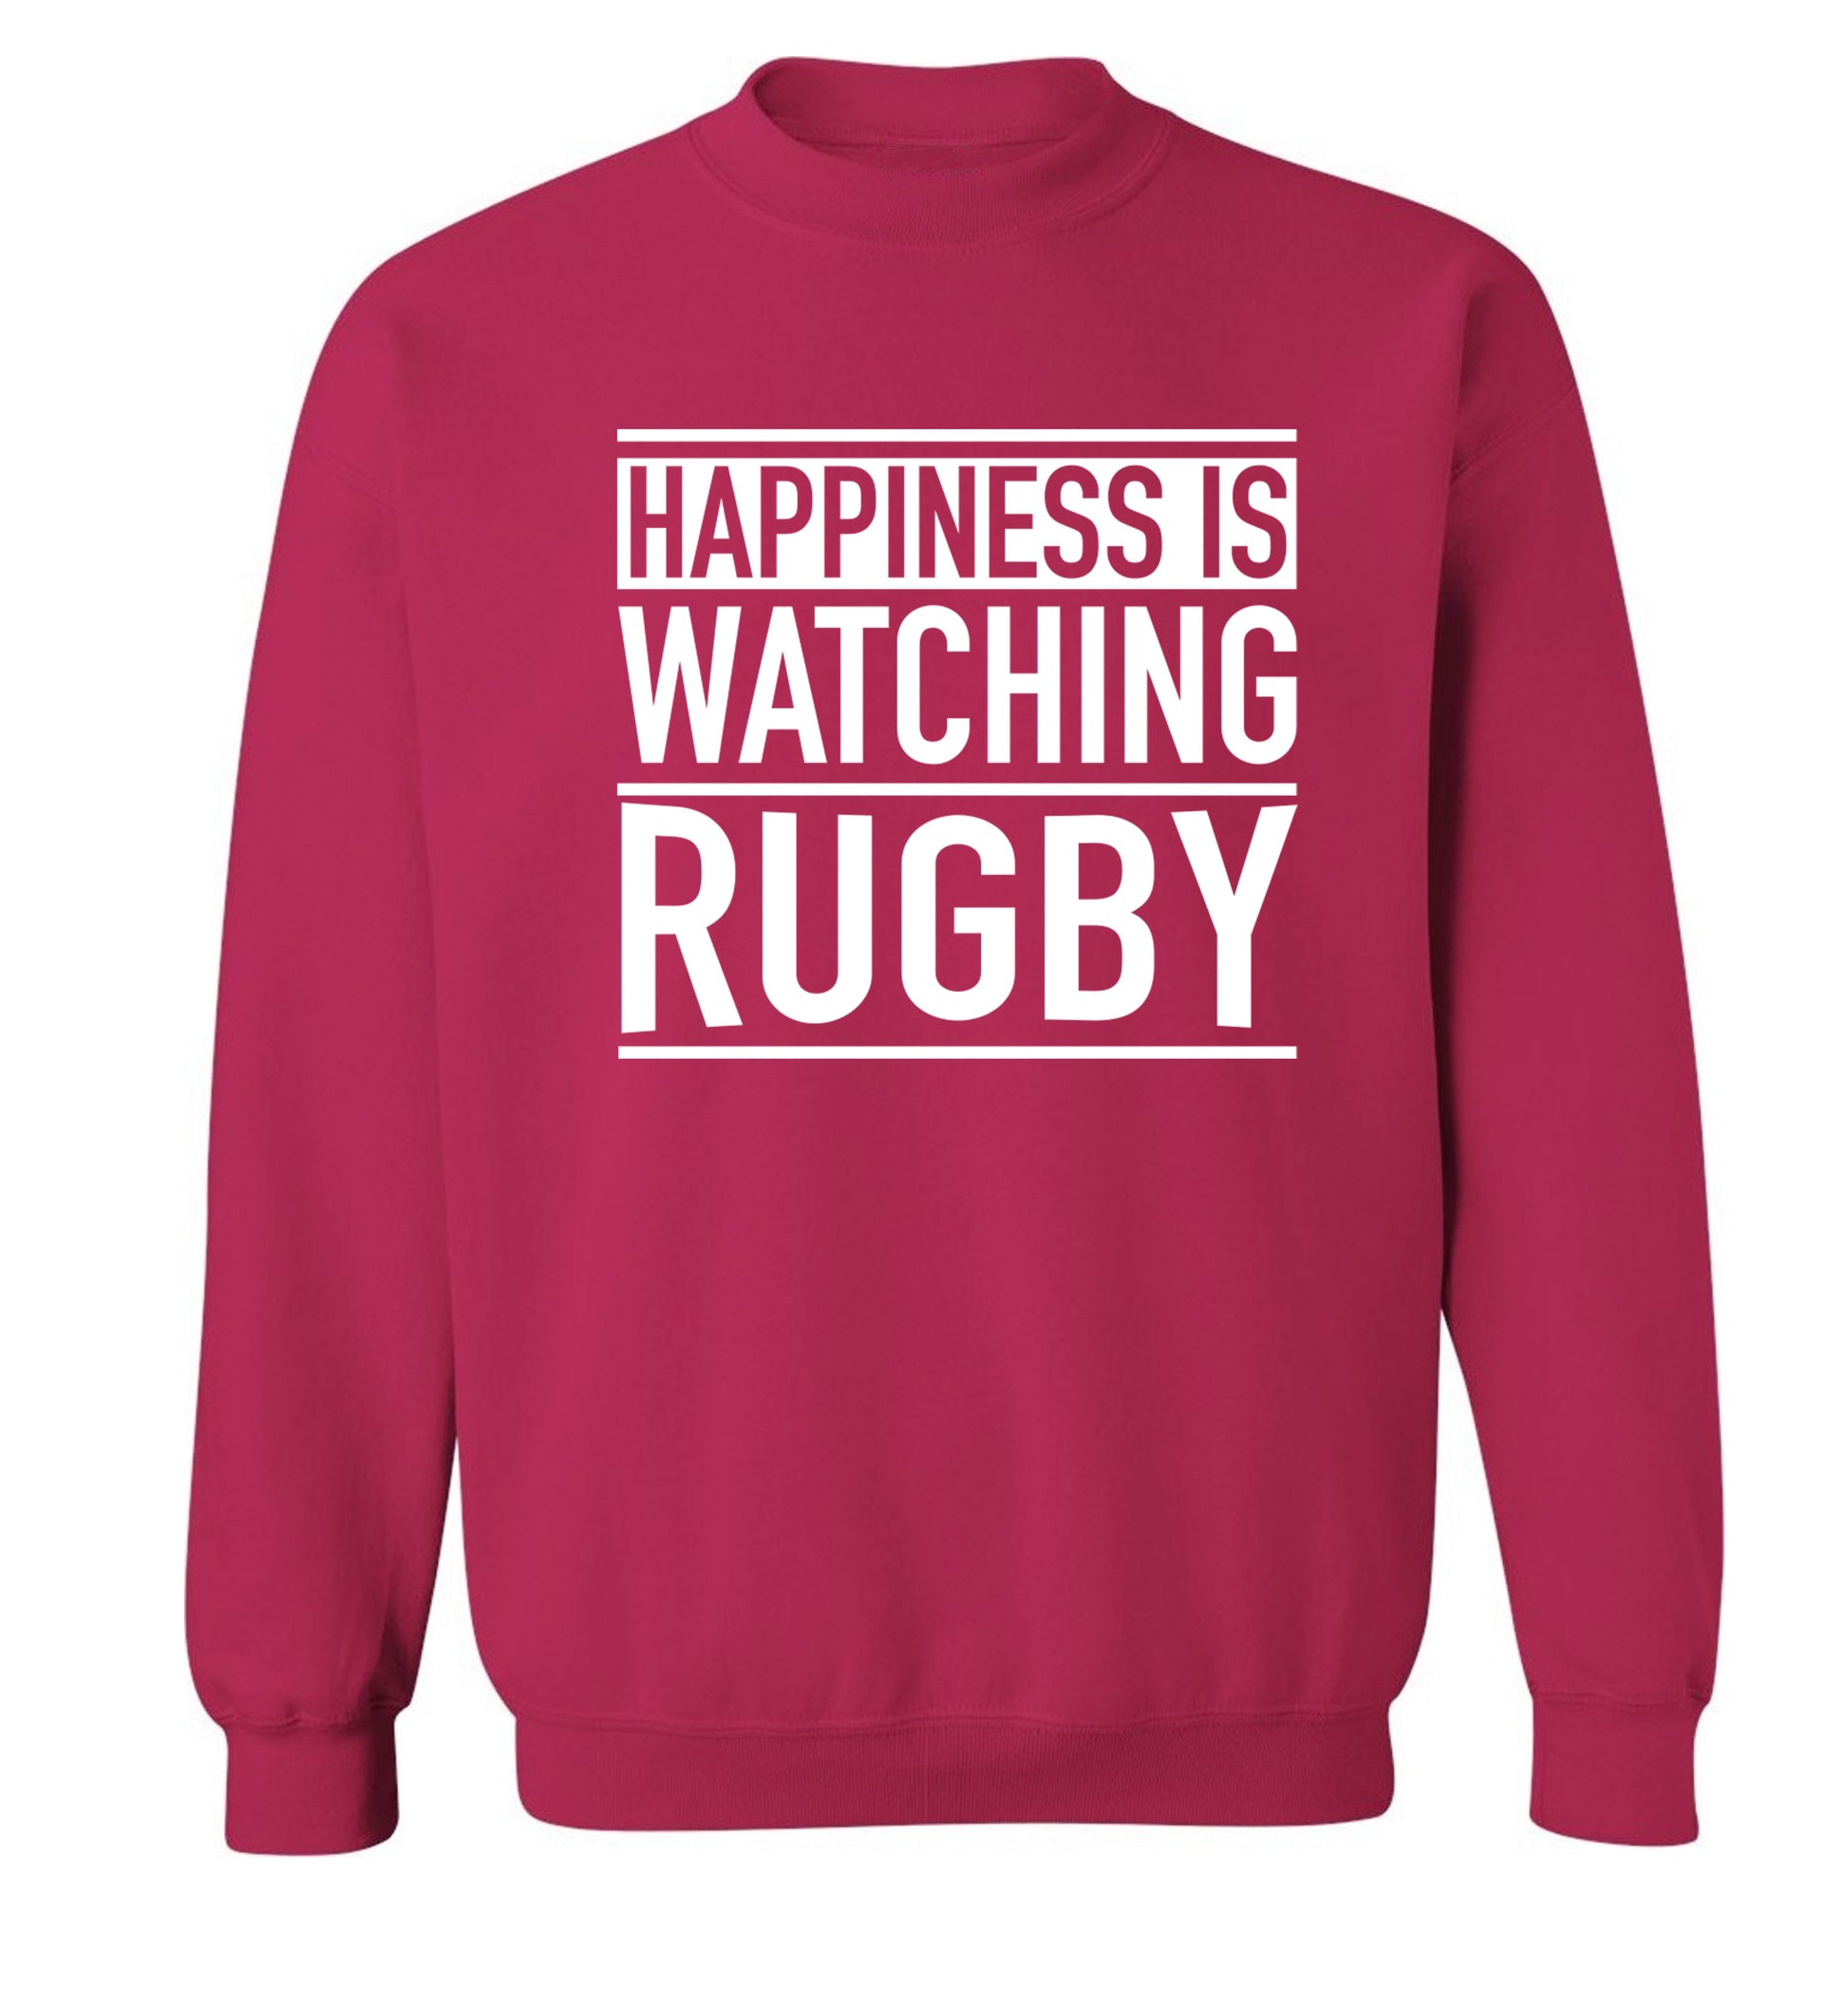 Happiness is watching rugby Adult's unisex pink Sweater 2XL